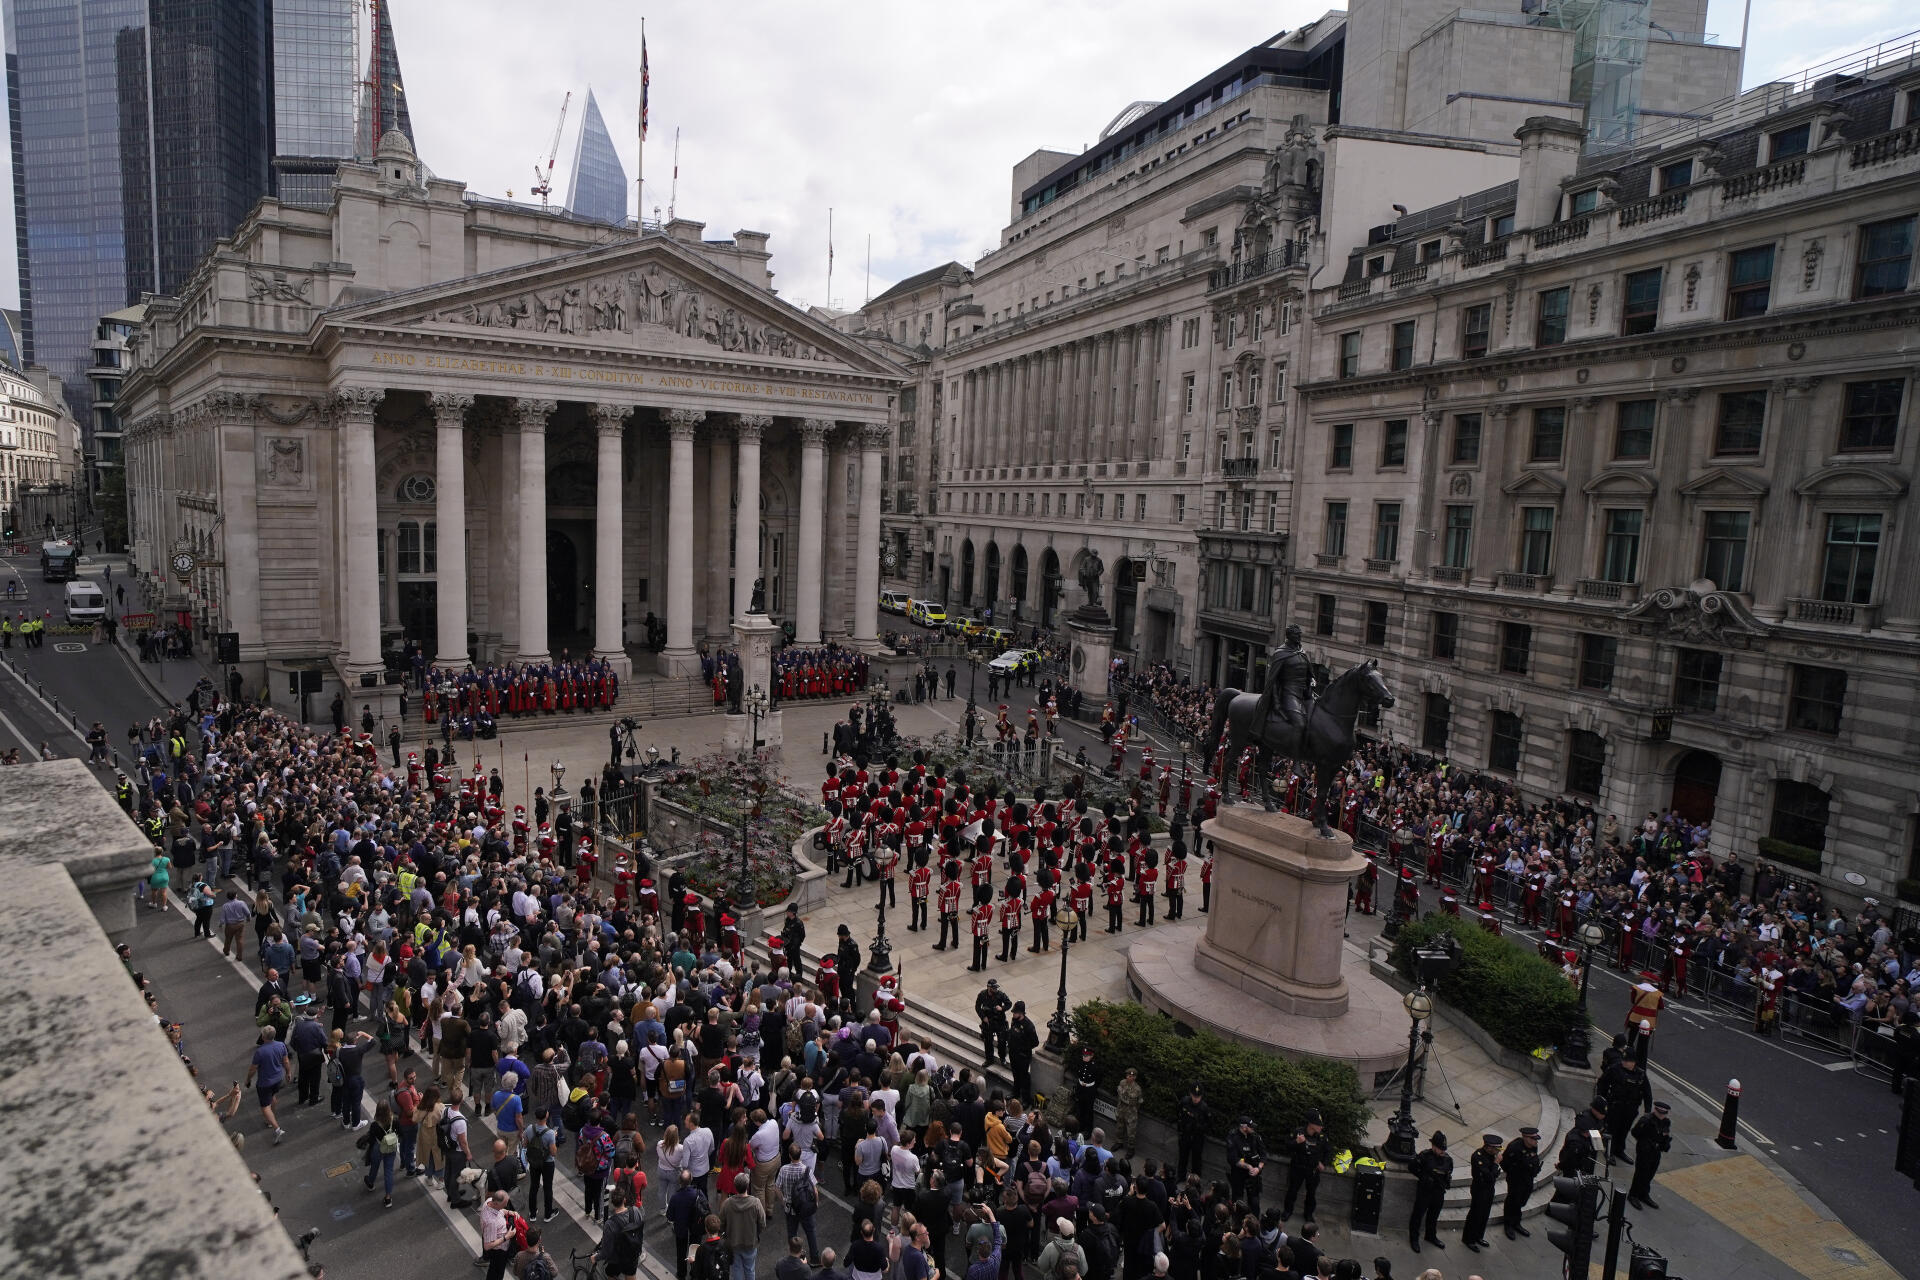 The proclamation ceremony in front of the Royal Exchange in the City of London on September 10, 2022.